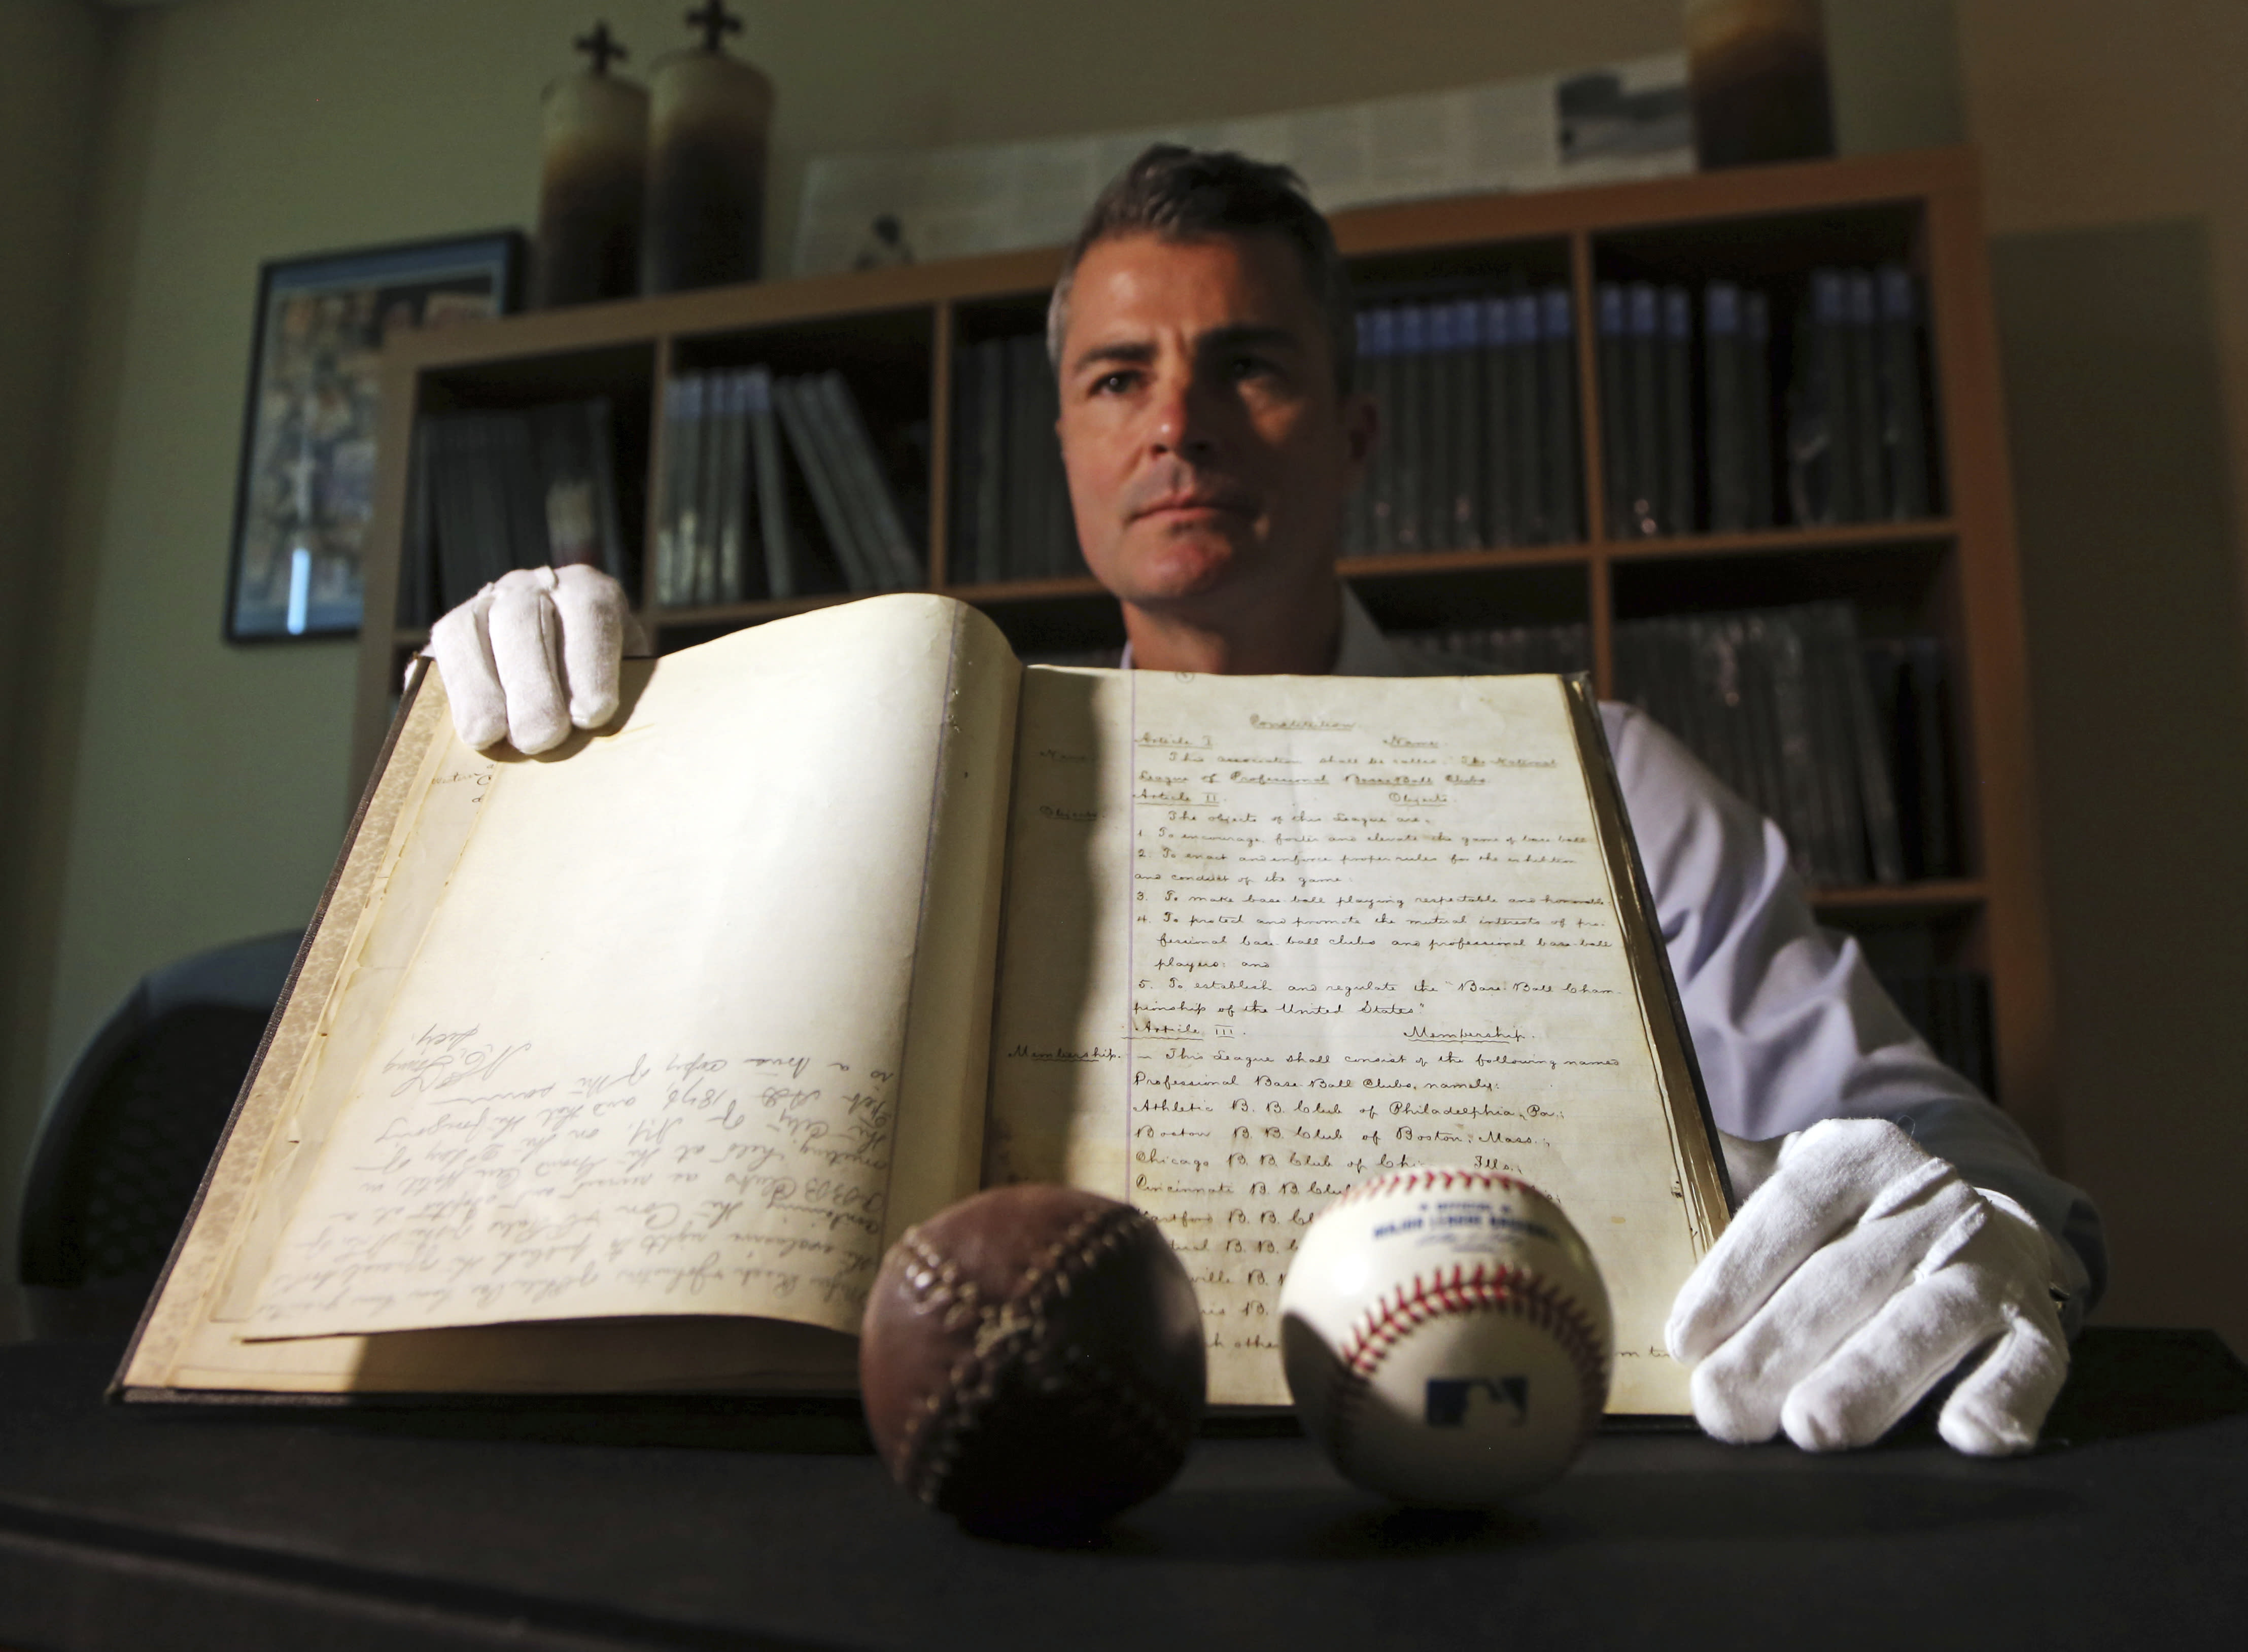 Big league baseball&#39;s founding documents to be auctioned